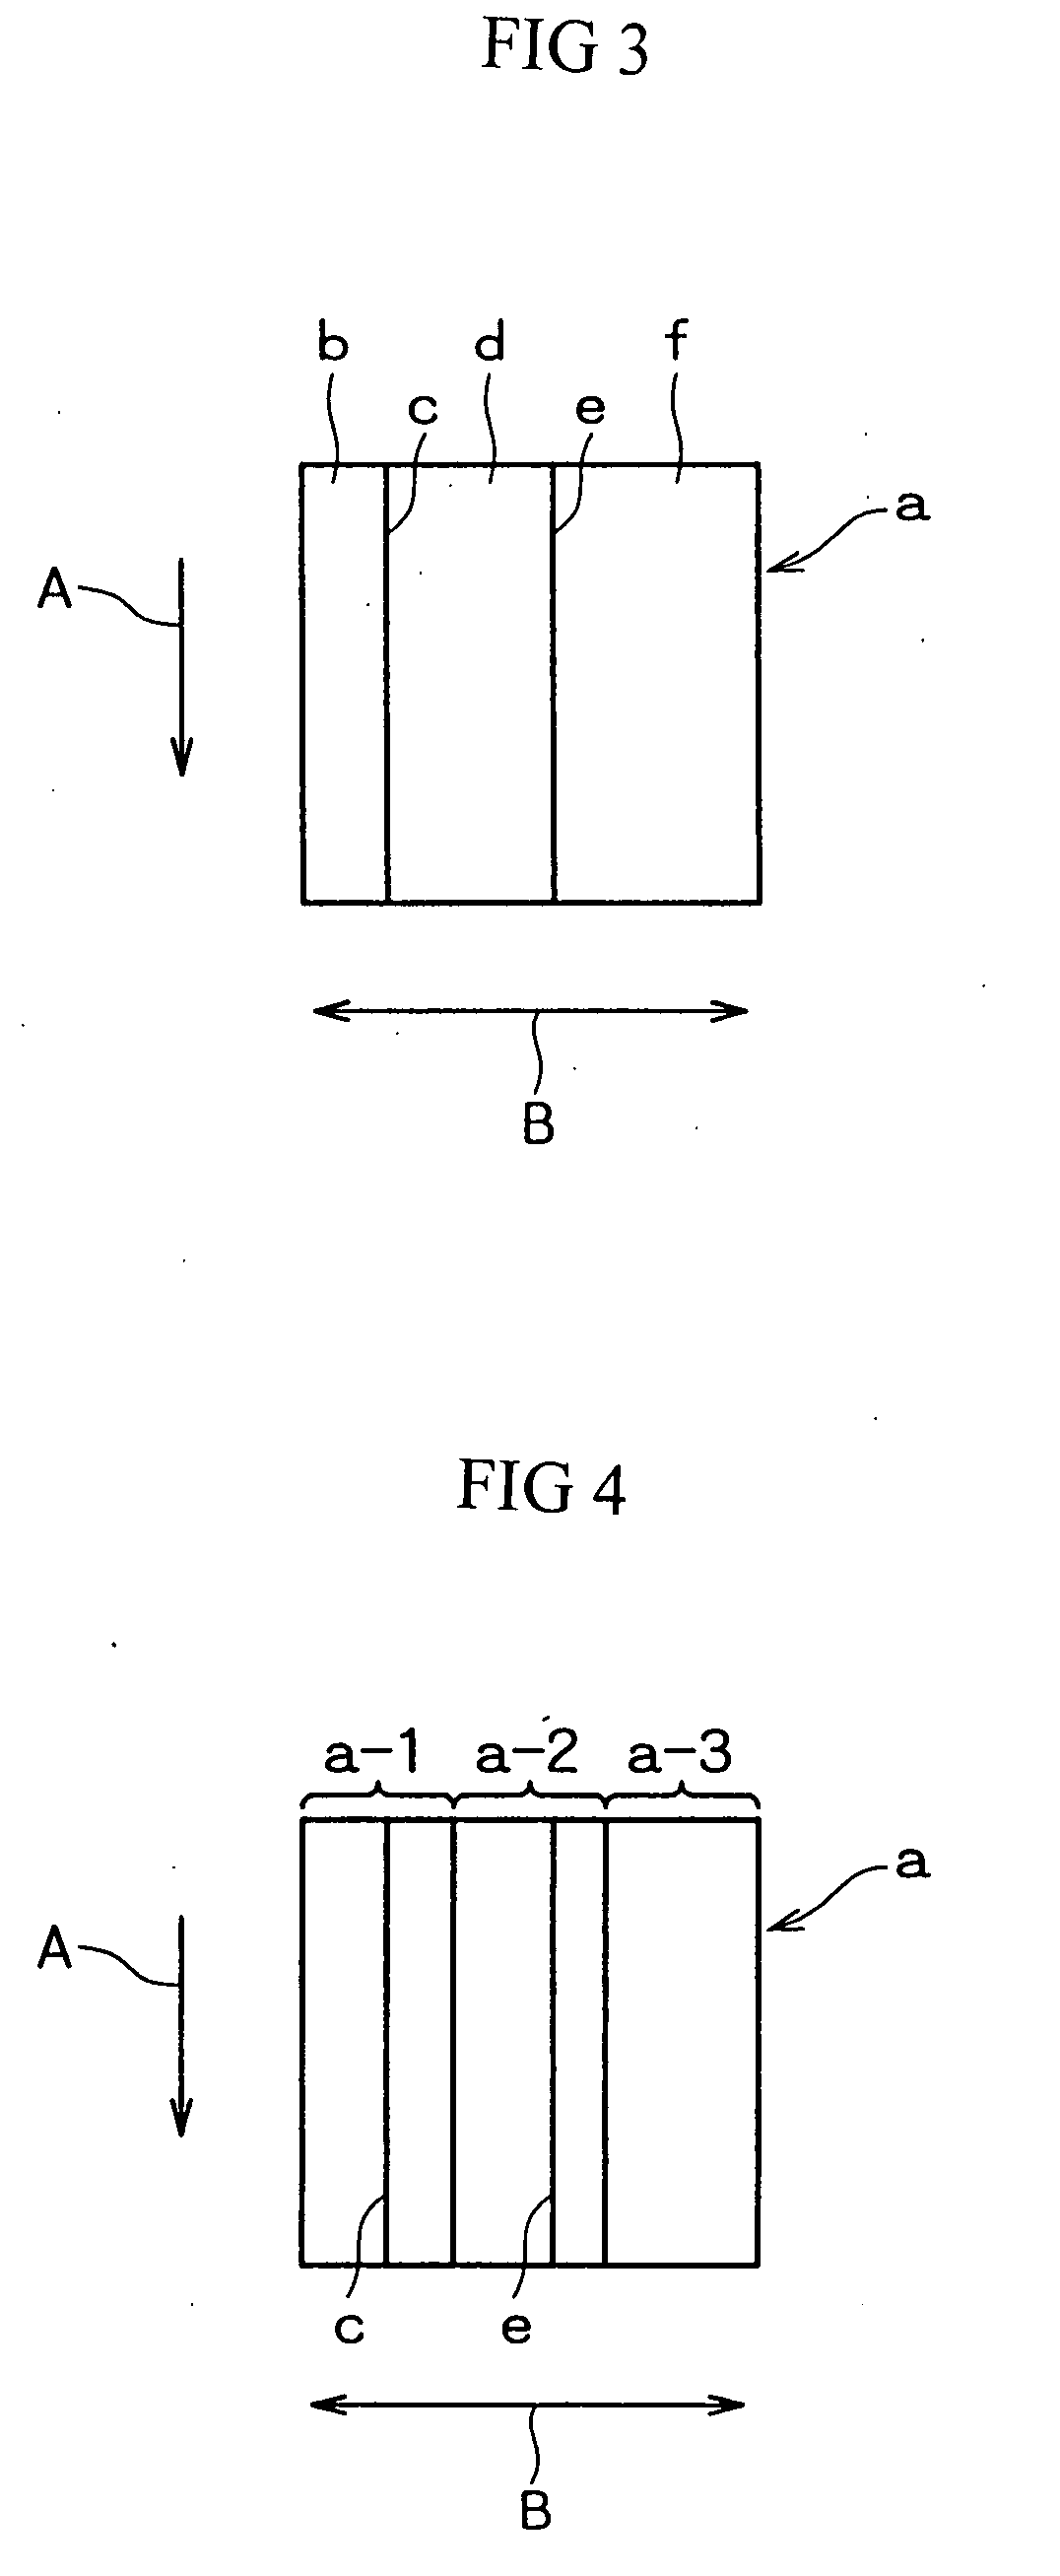 Article Visual Inspection Apparatus